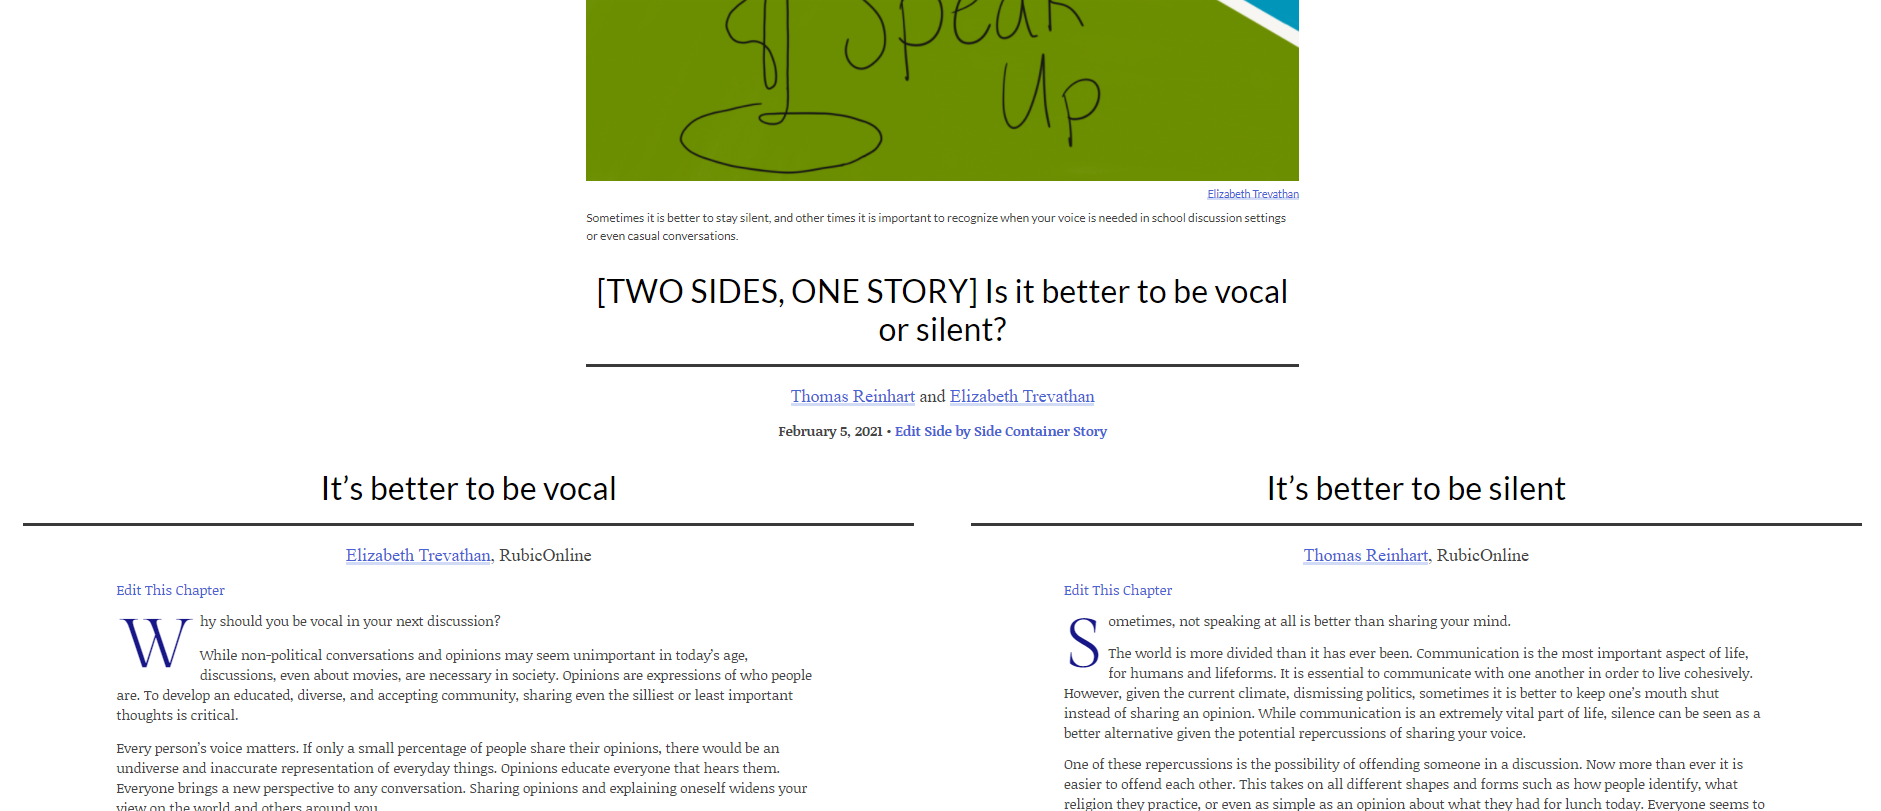 [TWO SIDES, ONE STORY] Is it better to be vocal or silent?